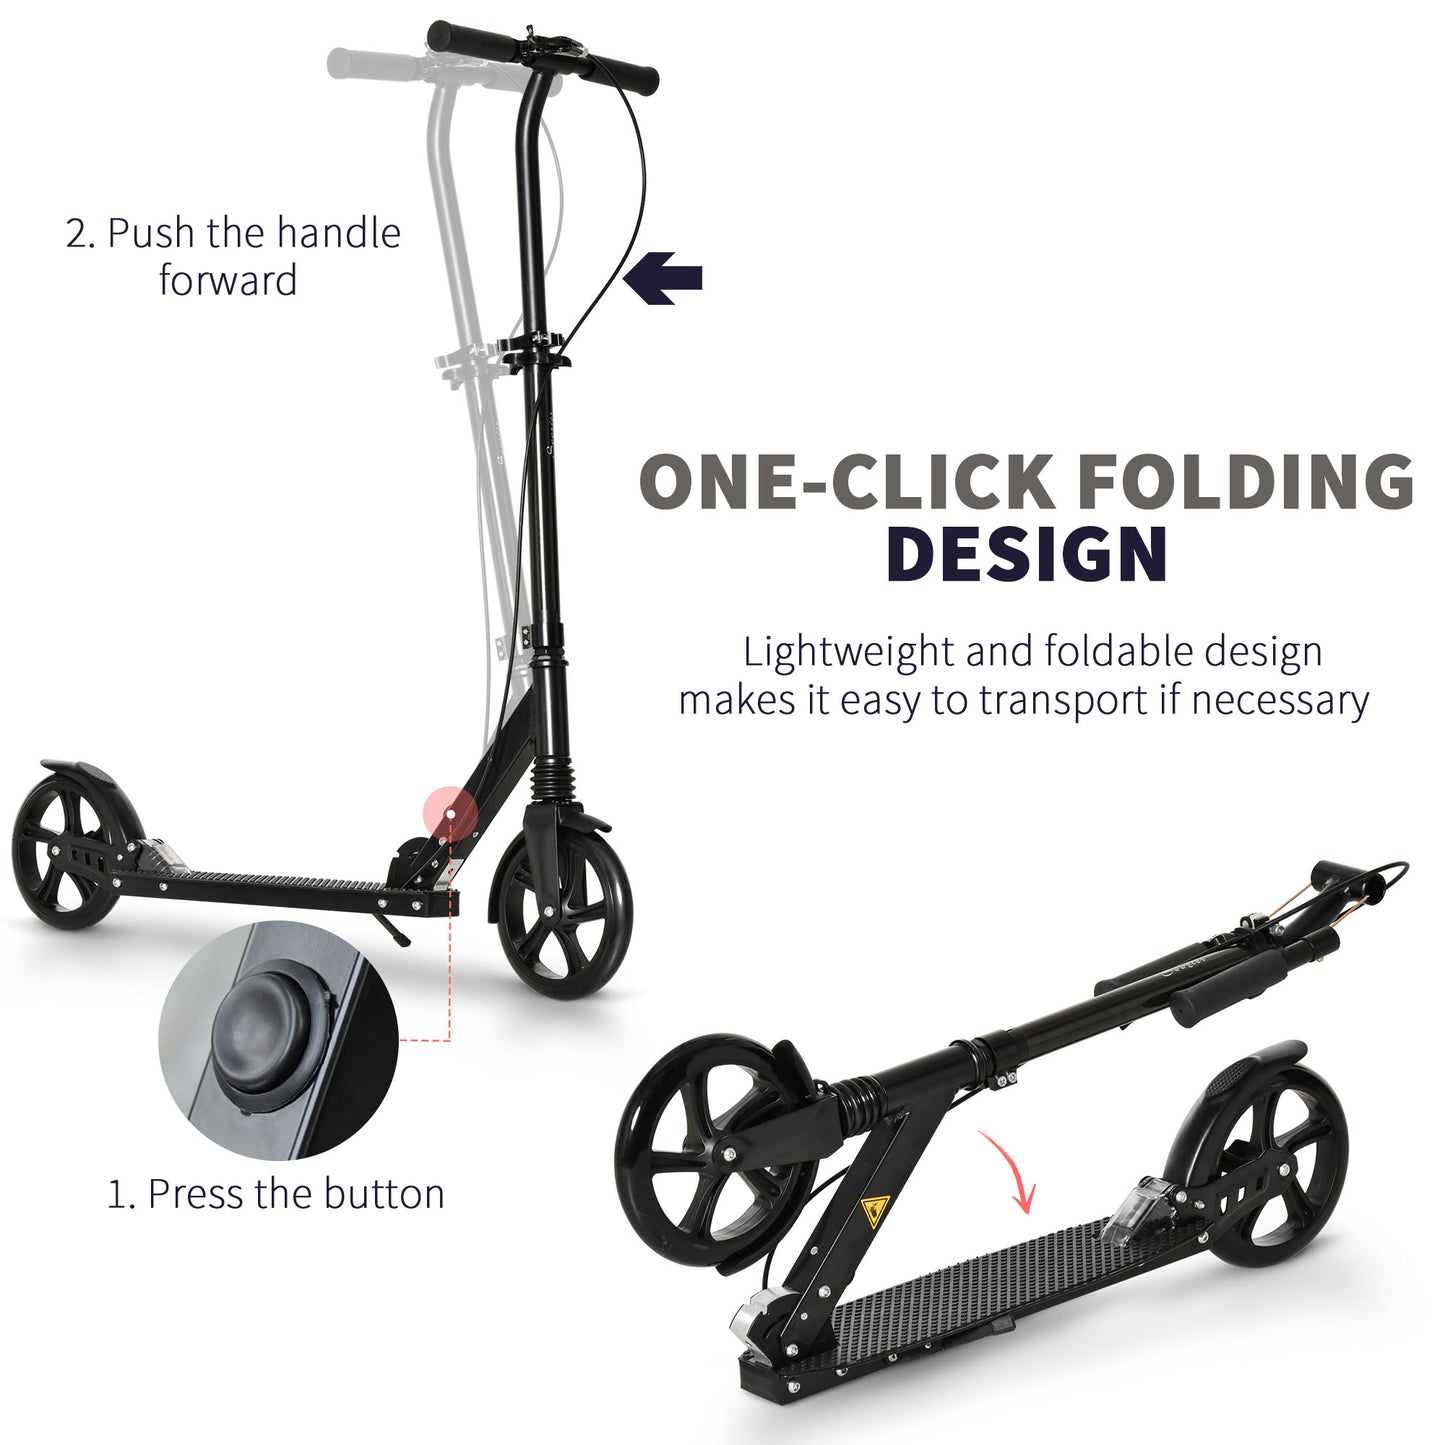 HOMCOM One-click Folding Kick Scooter for 14+ w/ Adjustable Handlebar, Push Scooter with Kickstand, Dual Brake System, Shock Absorber, Black